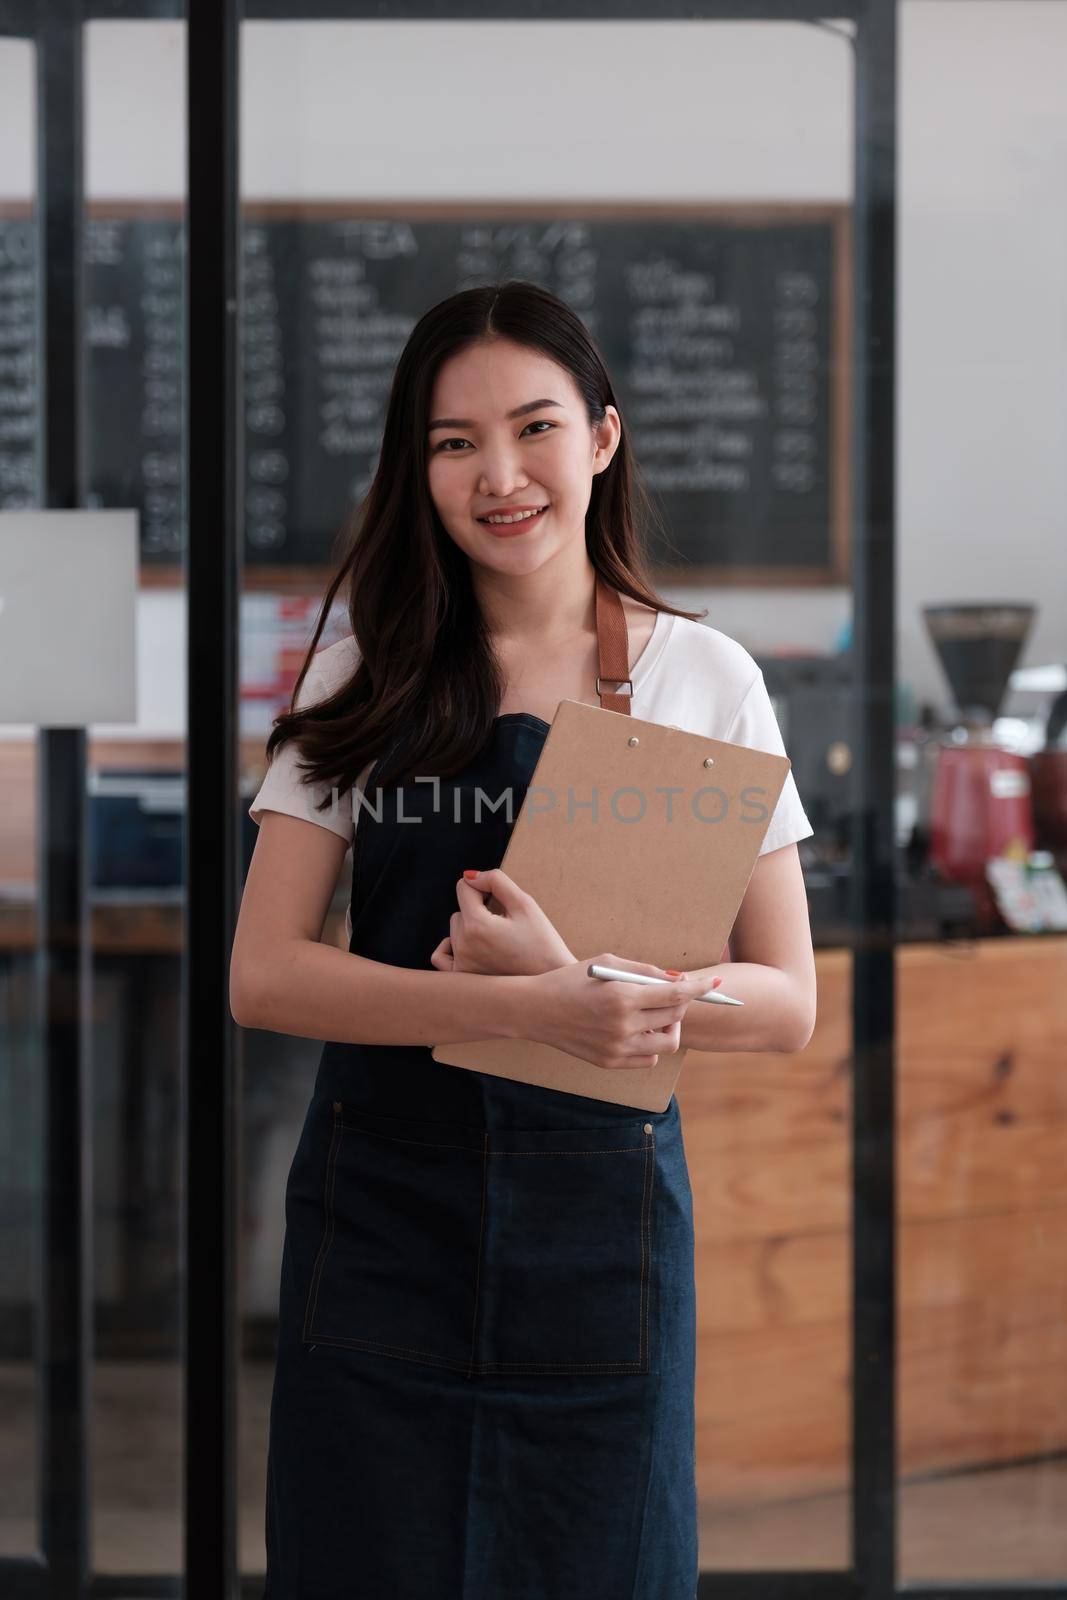 At her coffee shop, the business owner or barista with menu and waiting order from first customer back to open the shop after COVID-19